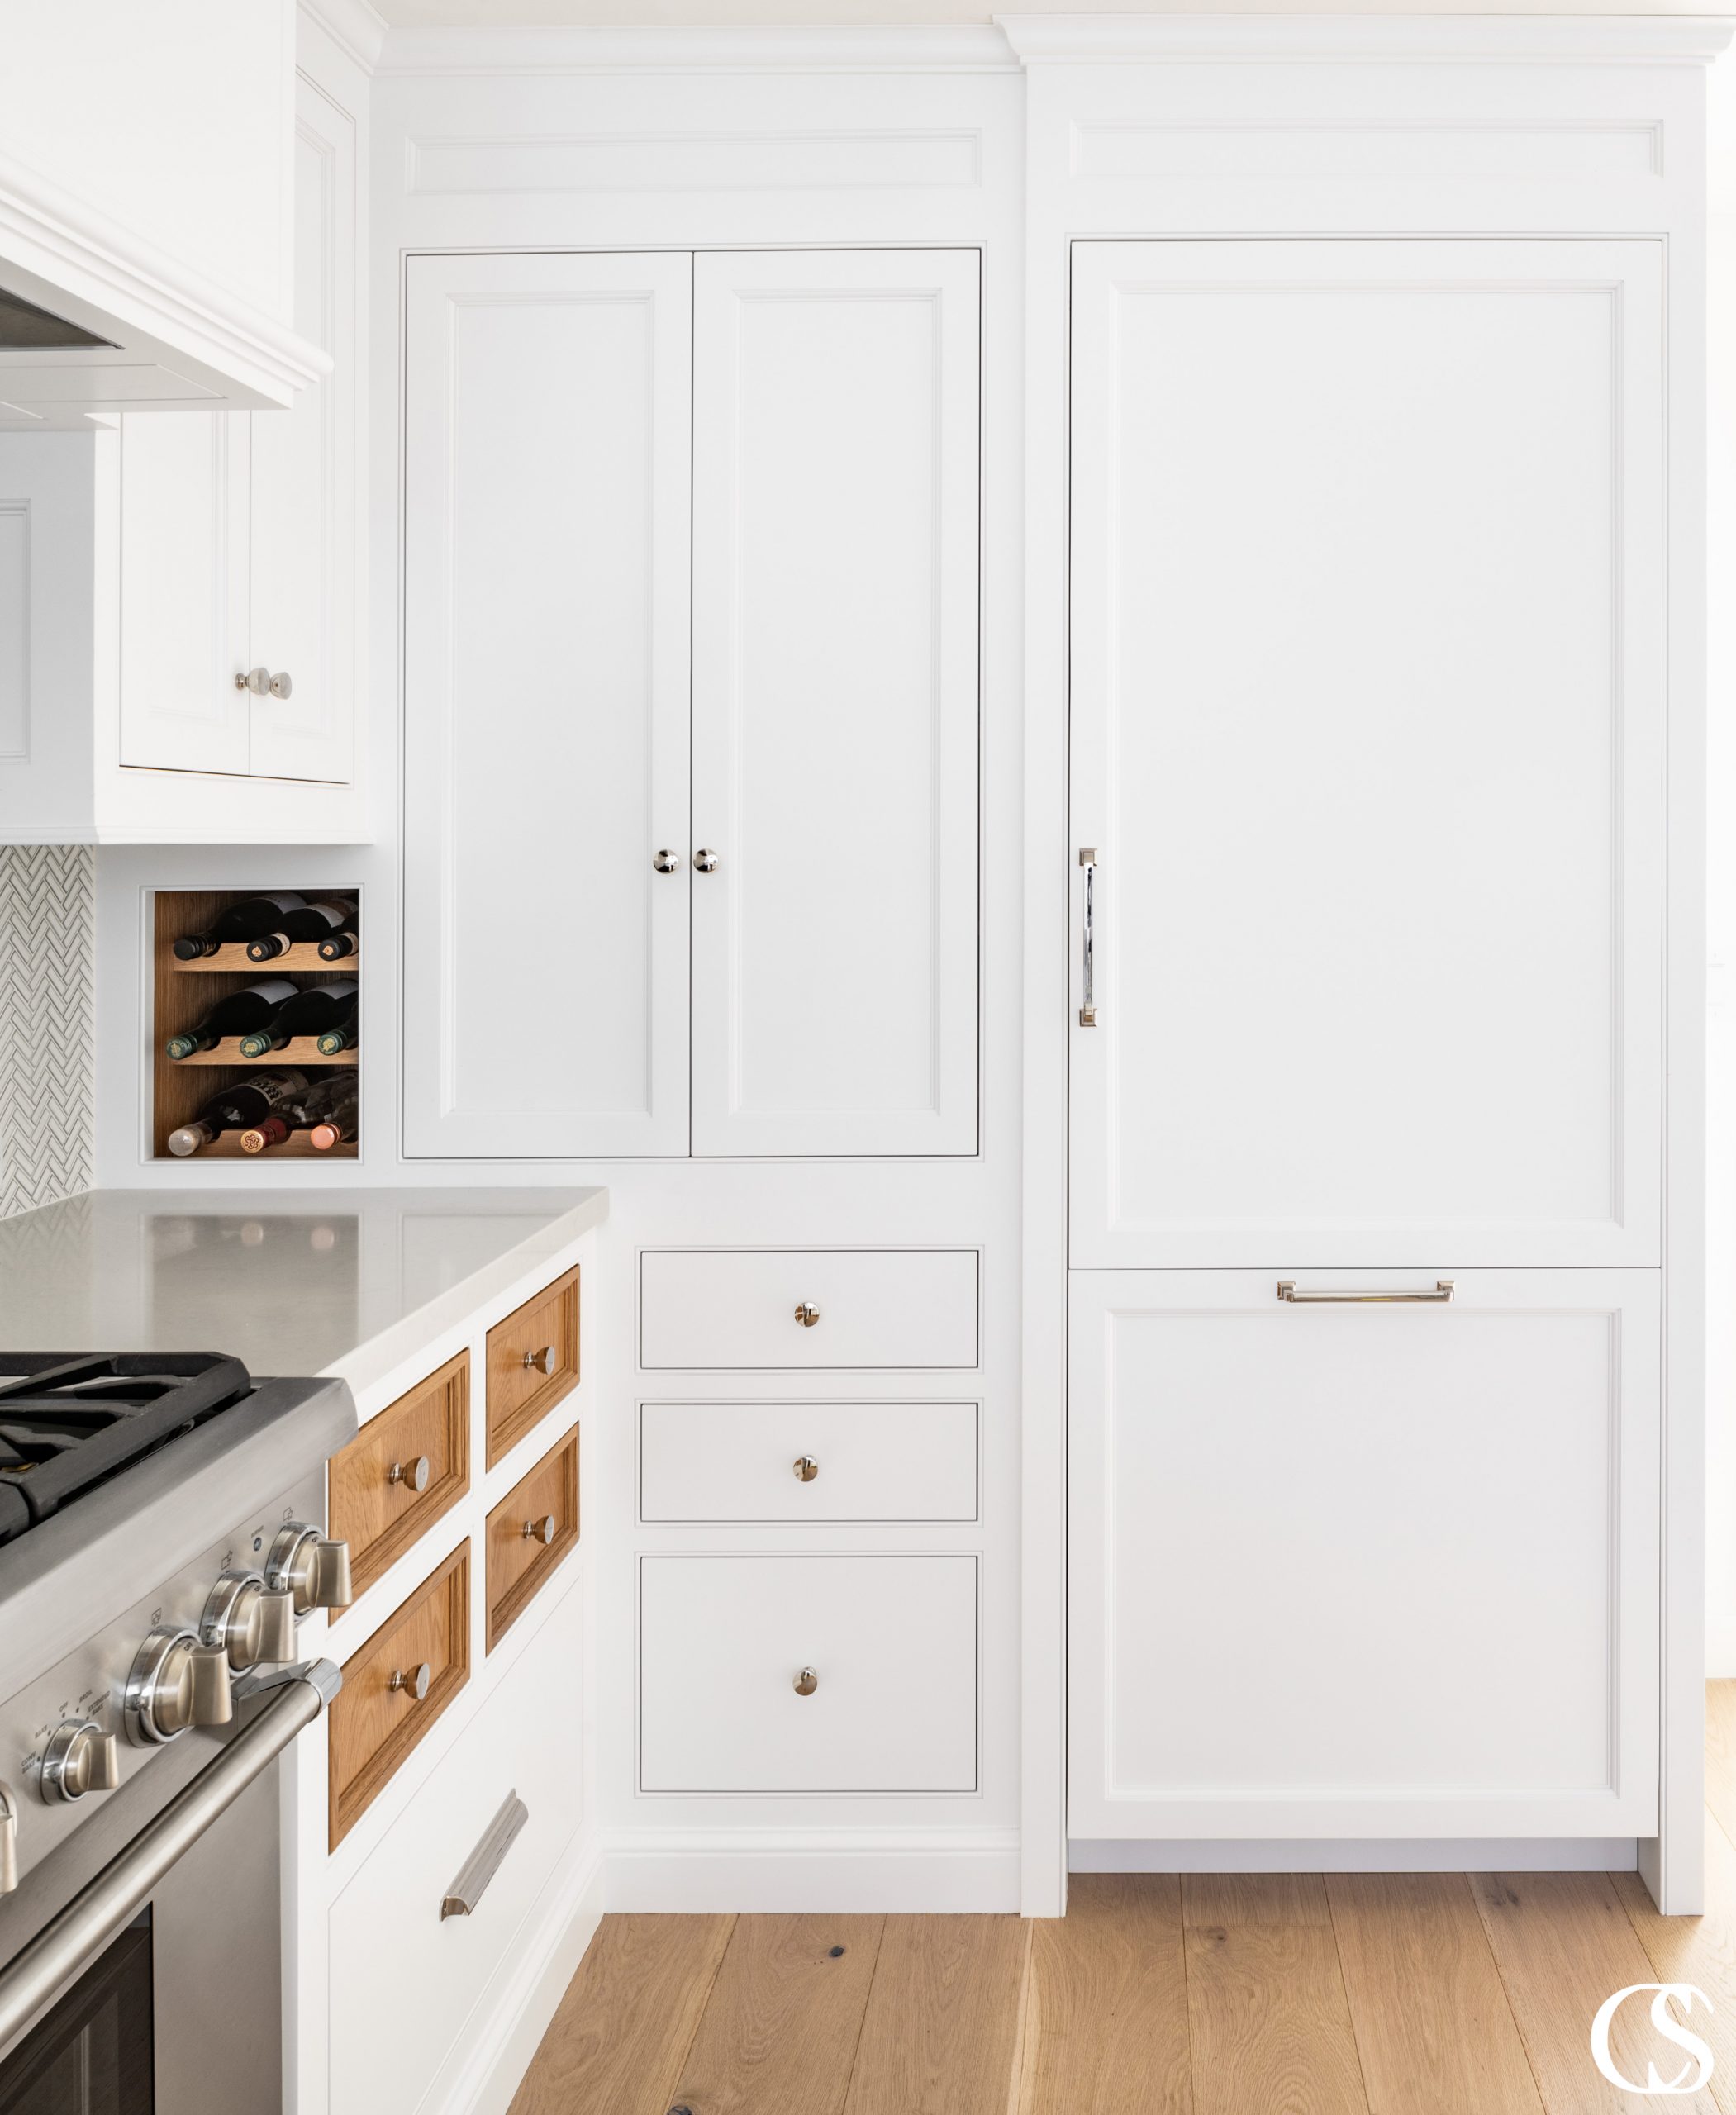 Who says every drawer and cupboard door have to match? These custom kitchen cabinet doors feature contrasting stained wood against the rest of the white painted cabinets, to great effect!